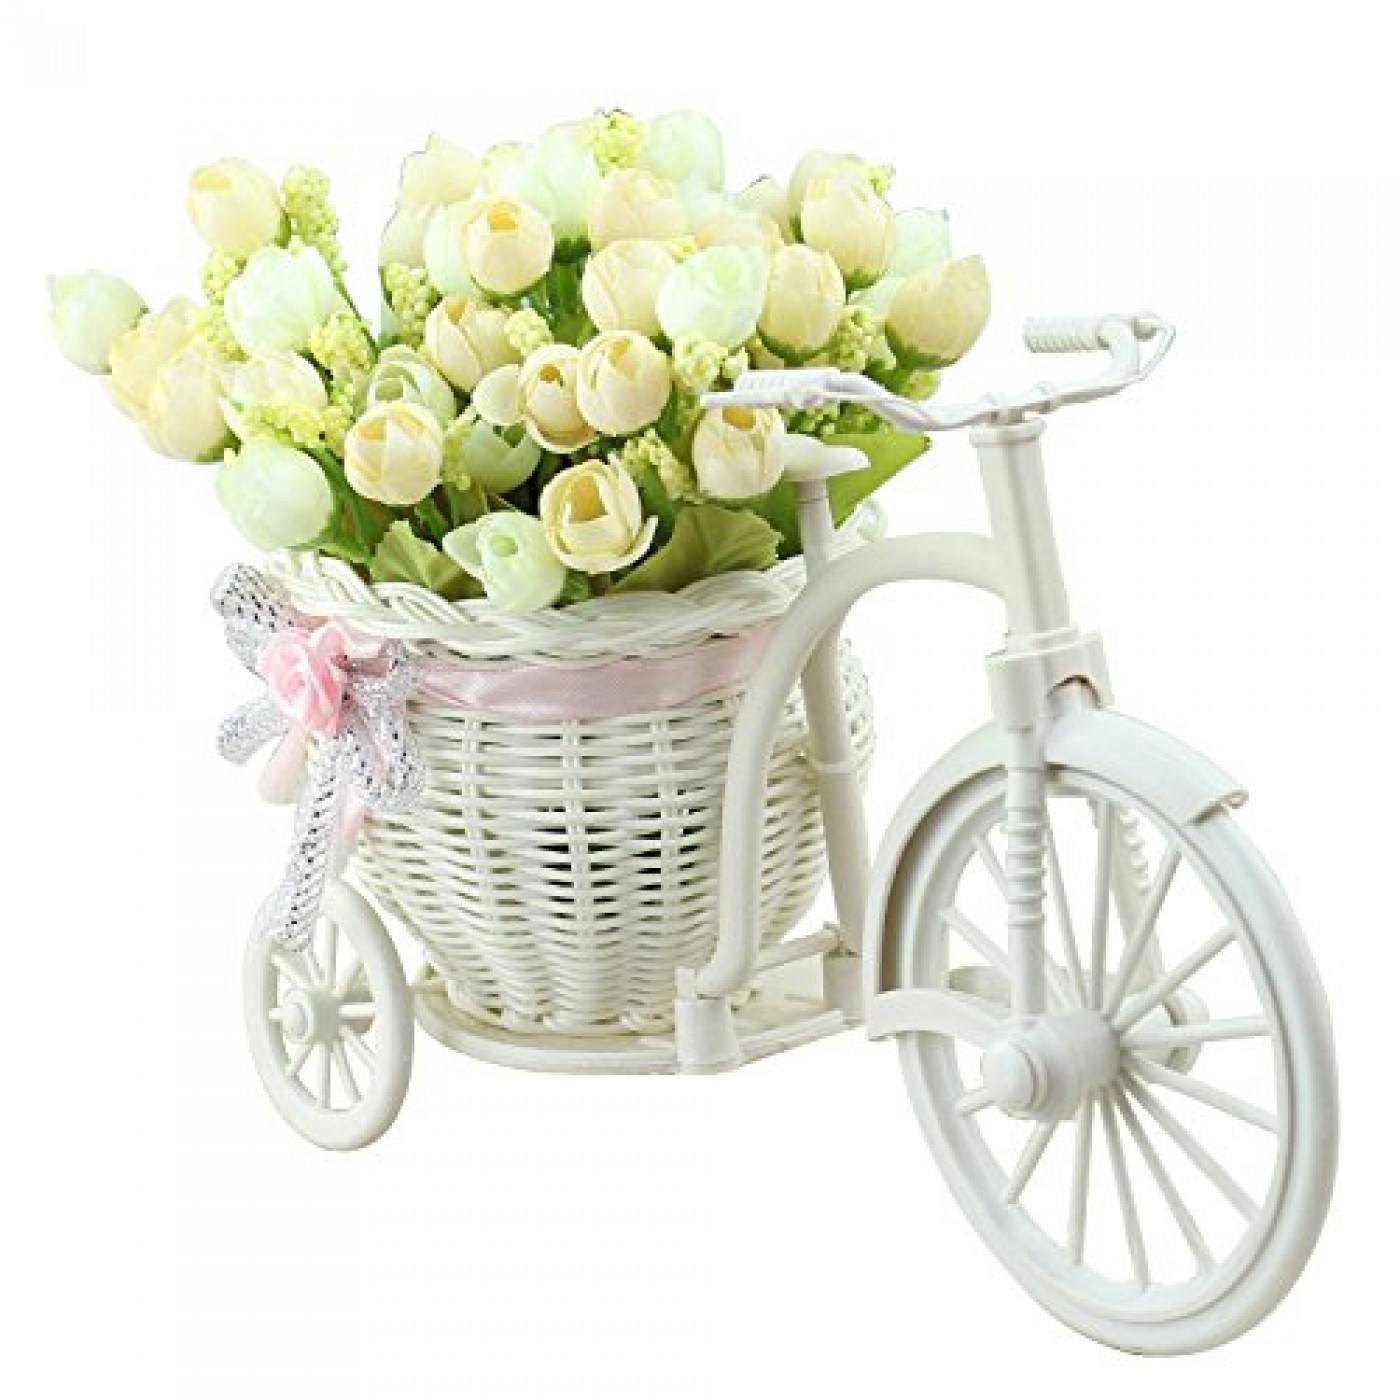 Cycle Shape Flowers Vase with Peonies Bunches